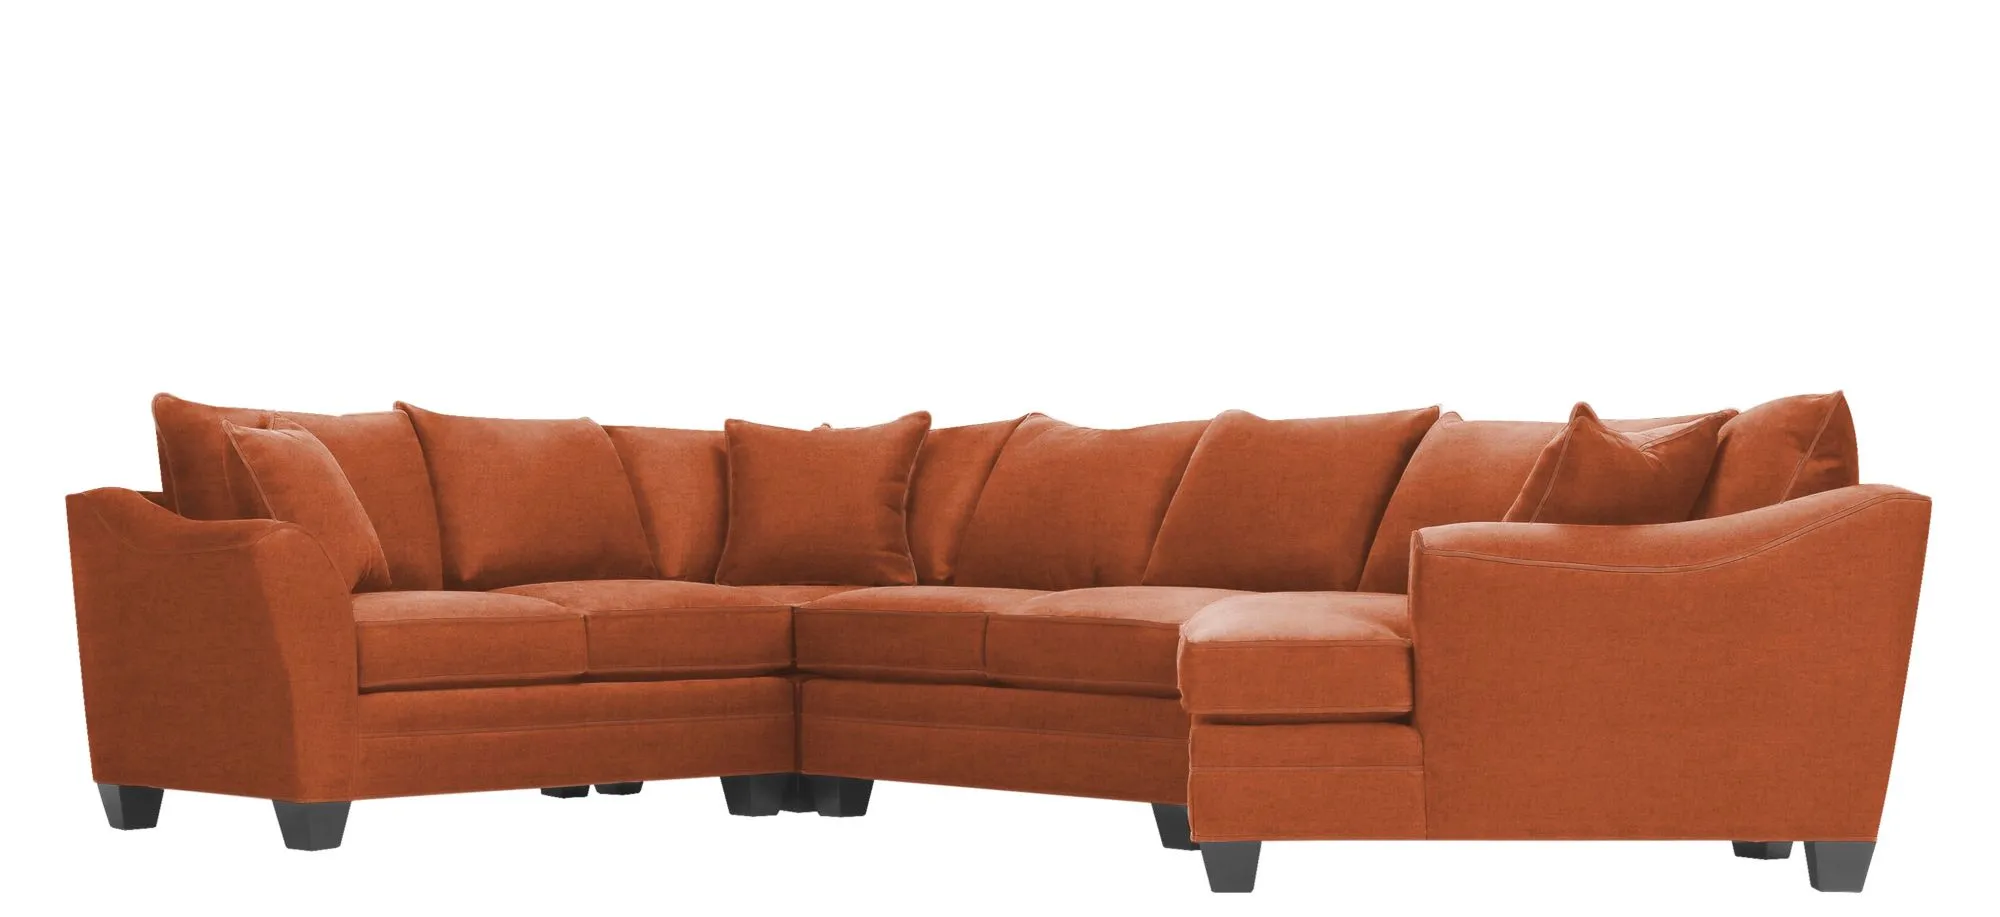 Foresthill 4-pc. Right Hand Cuddler with Loveseat Sectional Sofa in Santa Rosa Adobe by H.M. Richards